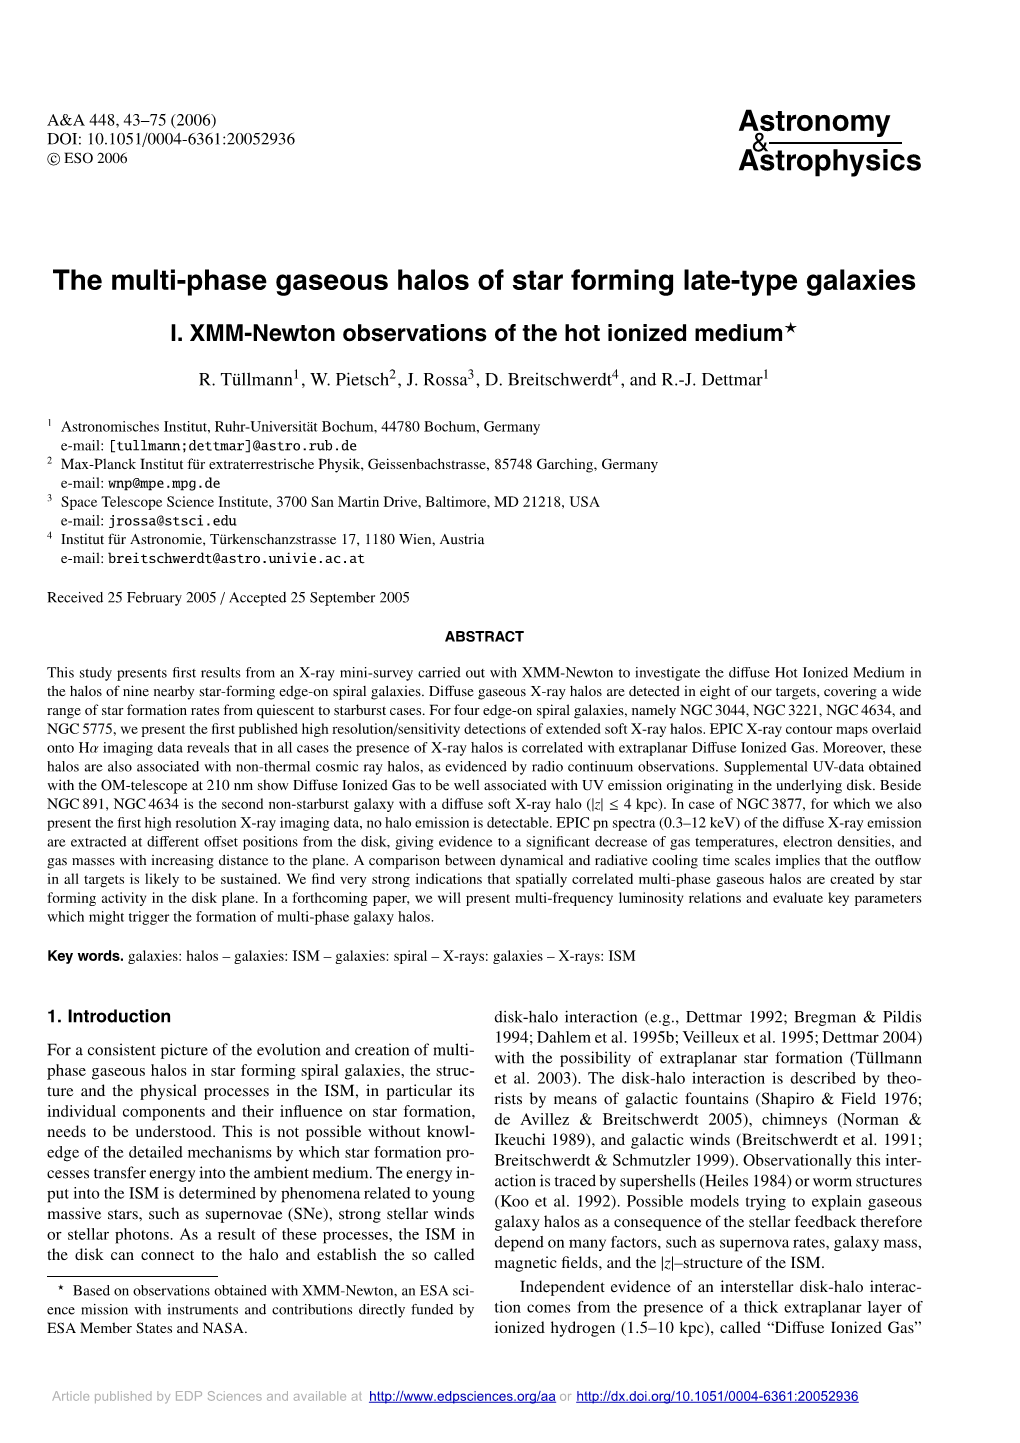 The Multi-Phase Gaseous Halos of Star Forming Late-Type Galaxies